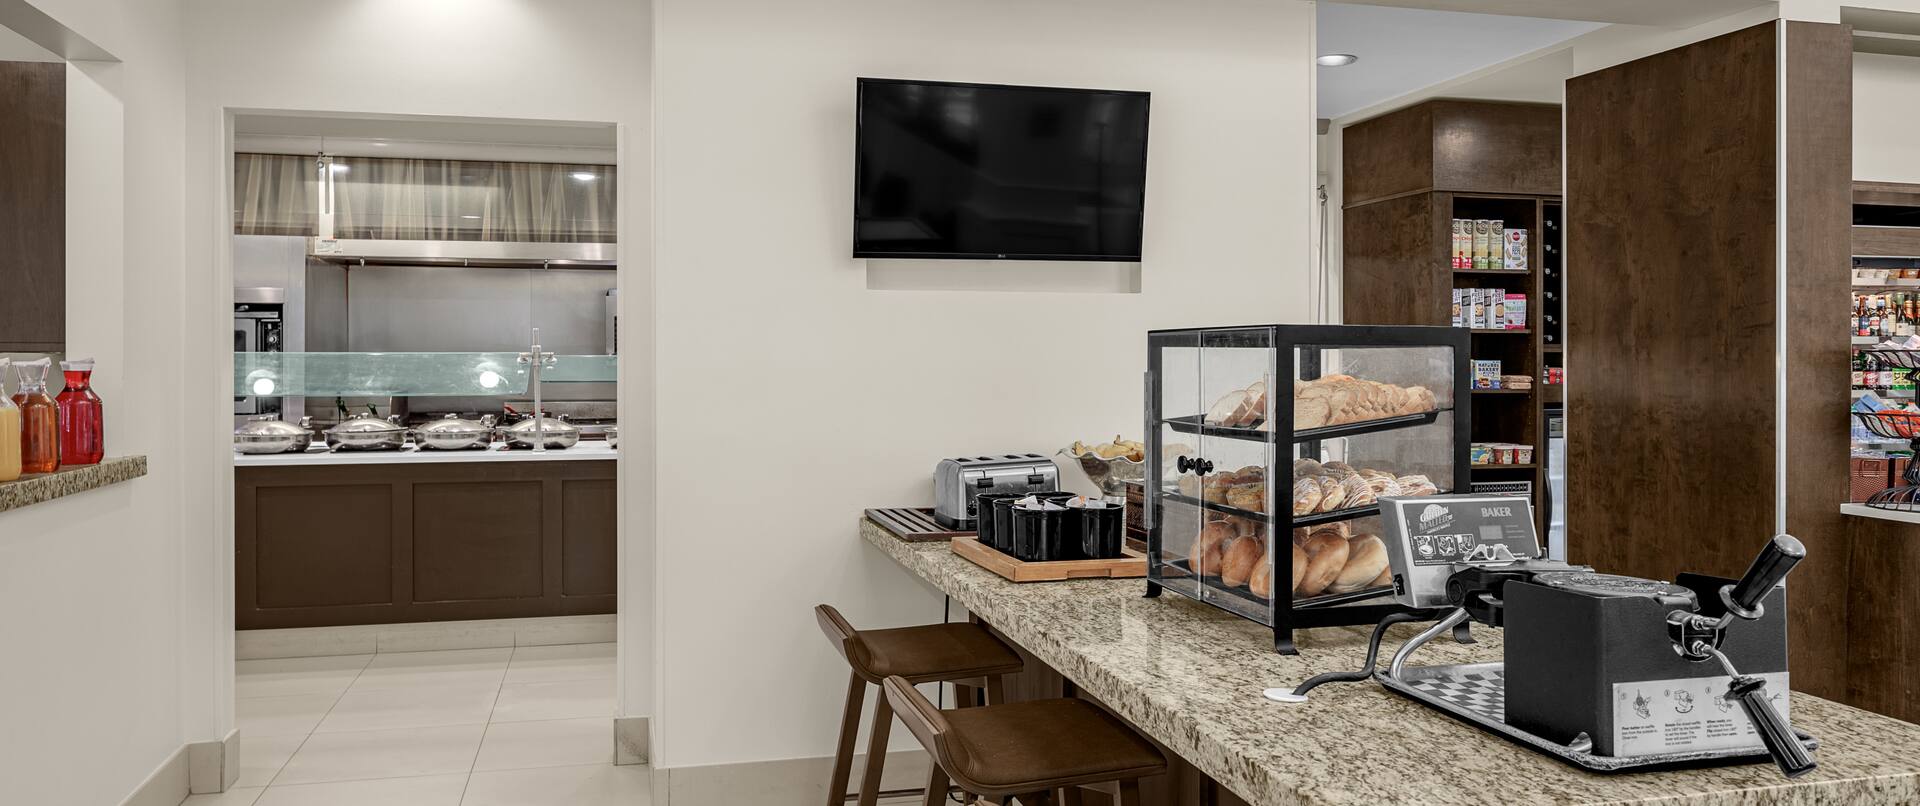 Breakfast area with food options and TV